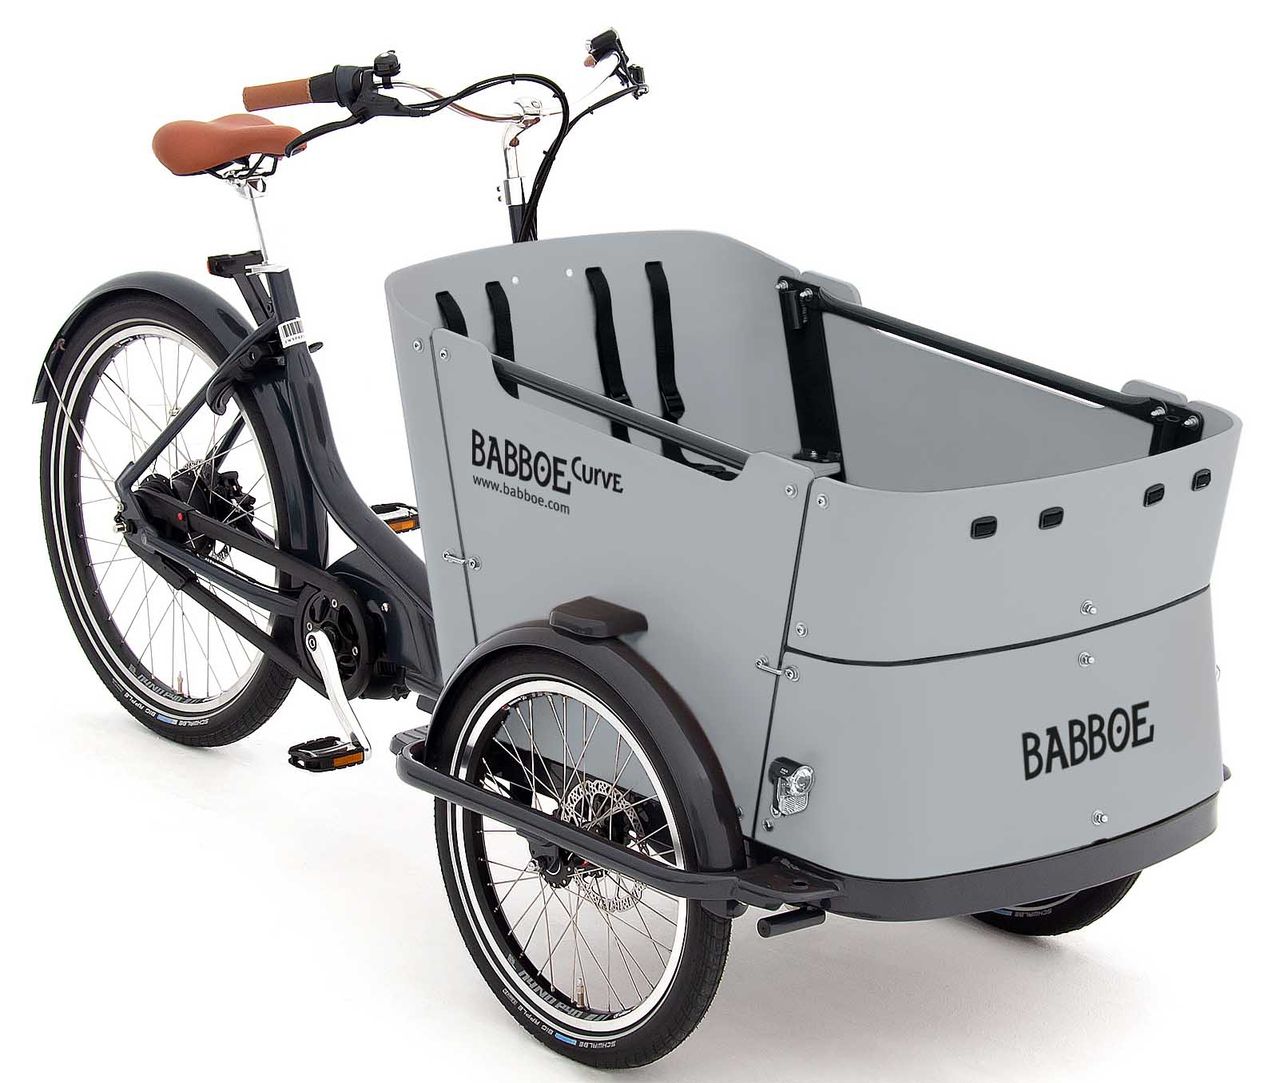 Babboe Curve Mountain - 500 Wh